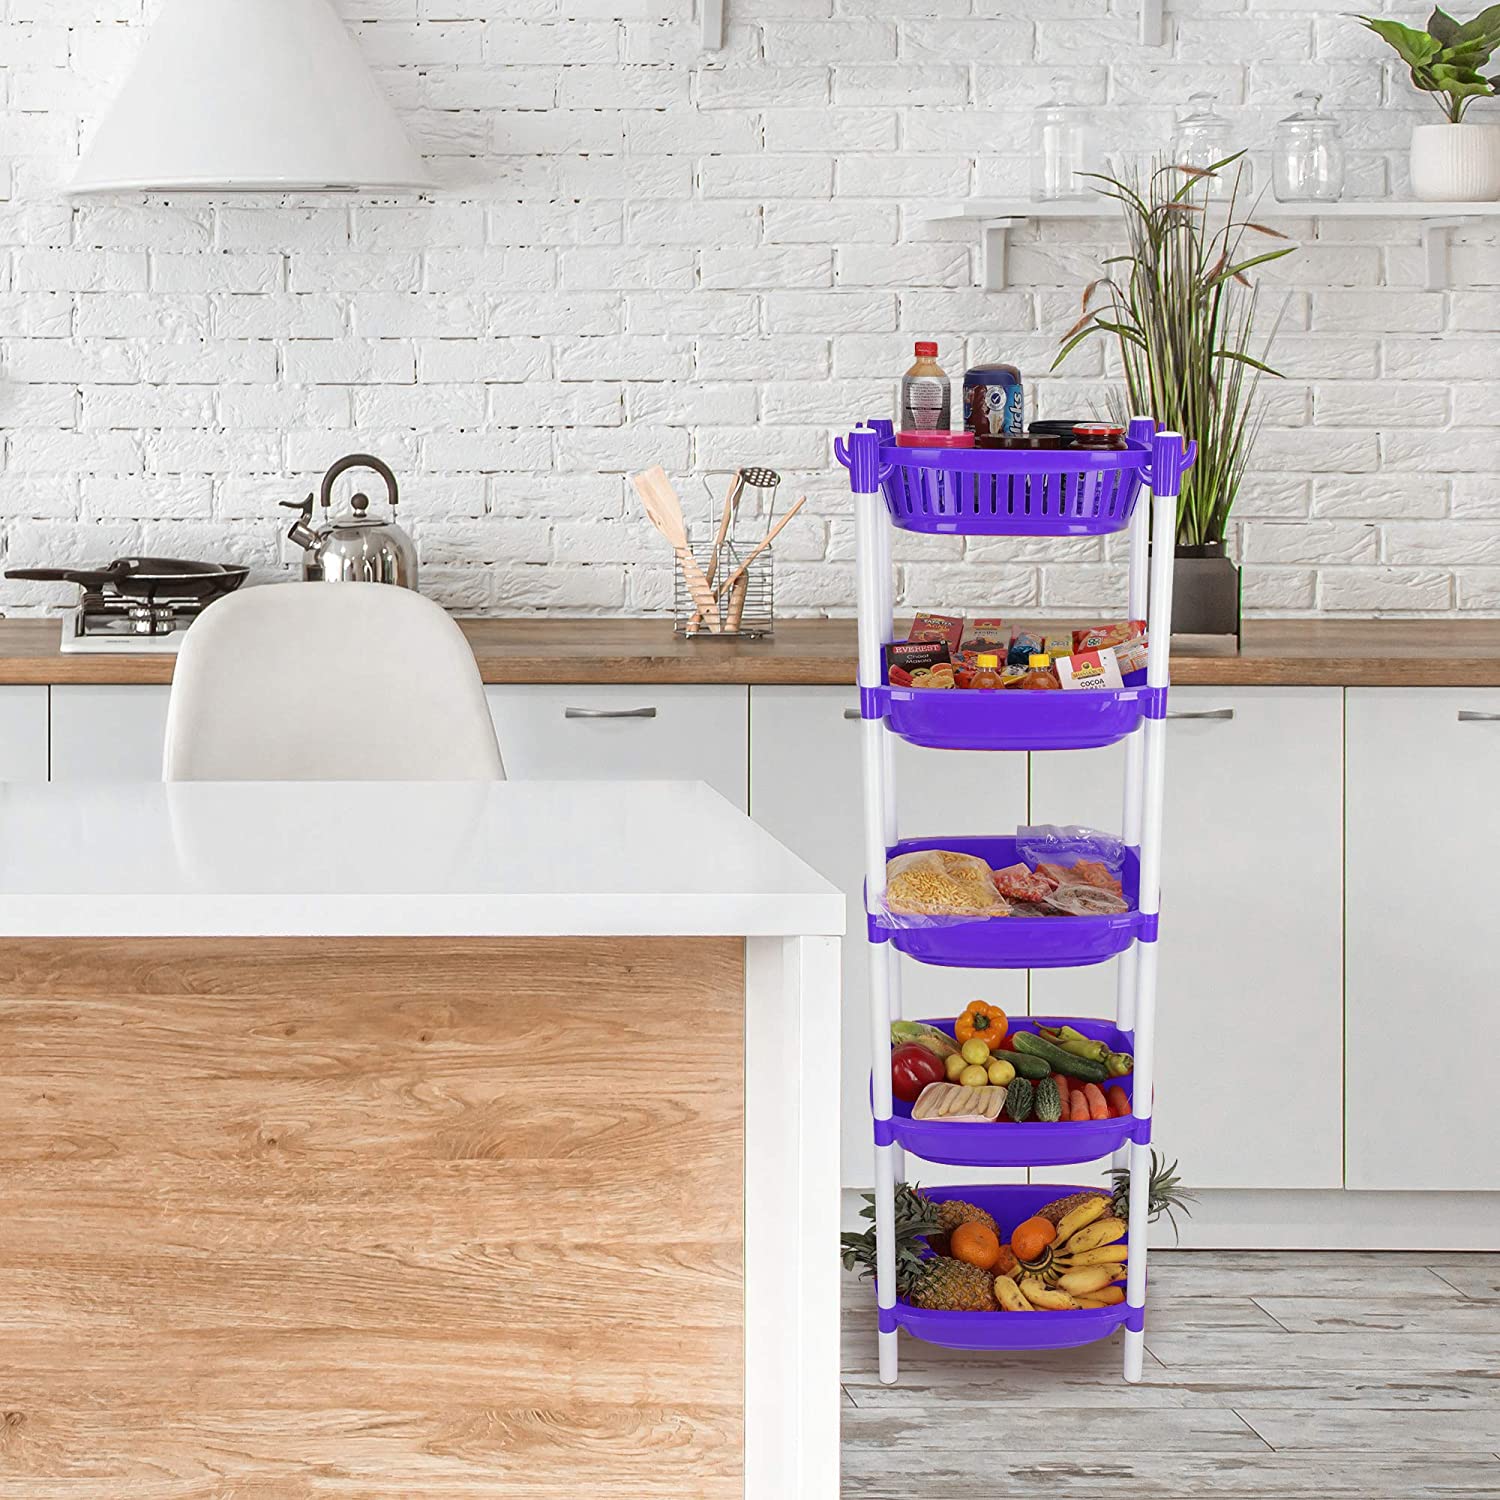 Cutting EDGE Plastic 3 Steps/Layer Shelf Rack for Kitchen Home & Office Use, Fruits, Onion, Potato, Vegetables Tier Basket Trays for Household Multi-purpose for Cosmetics Super Sturdy Organiser Storage